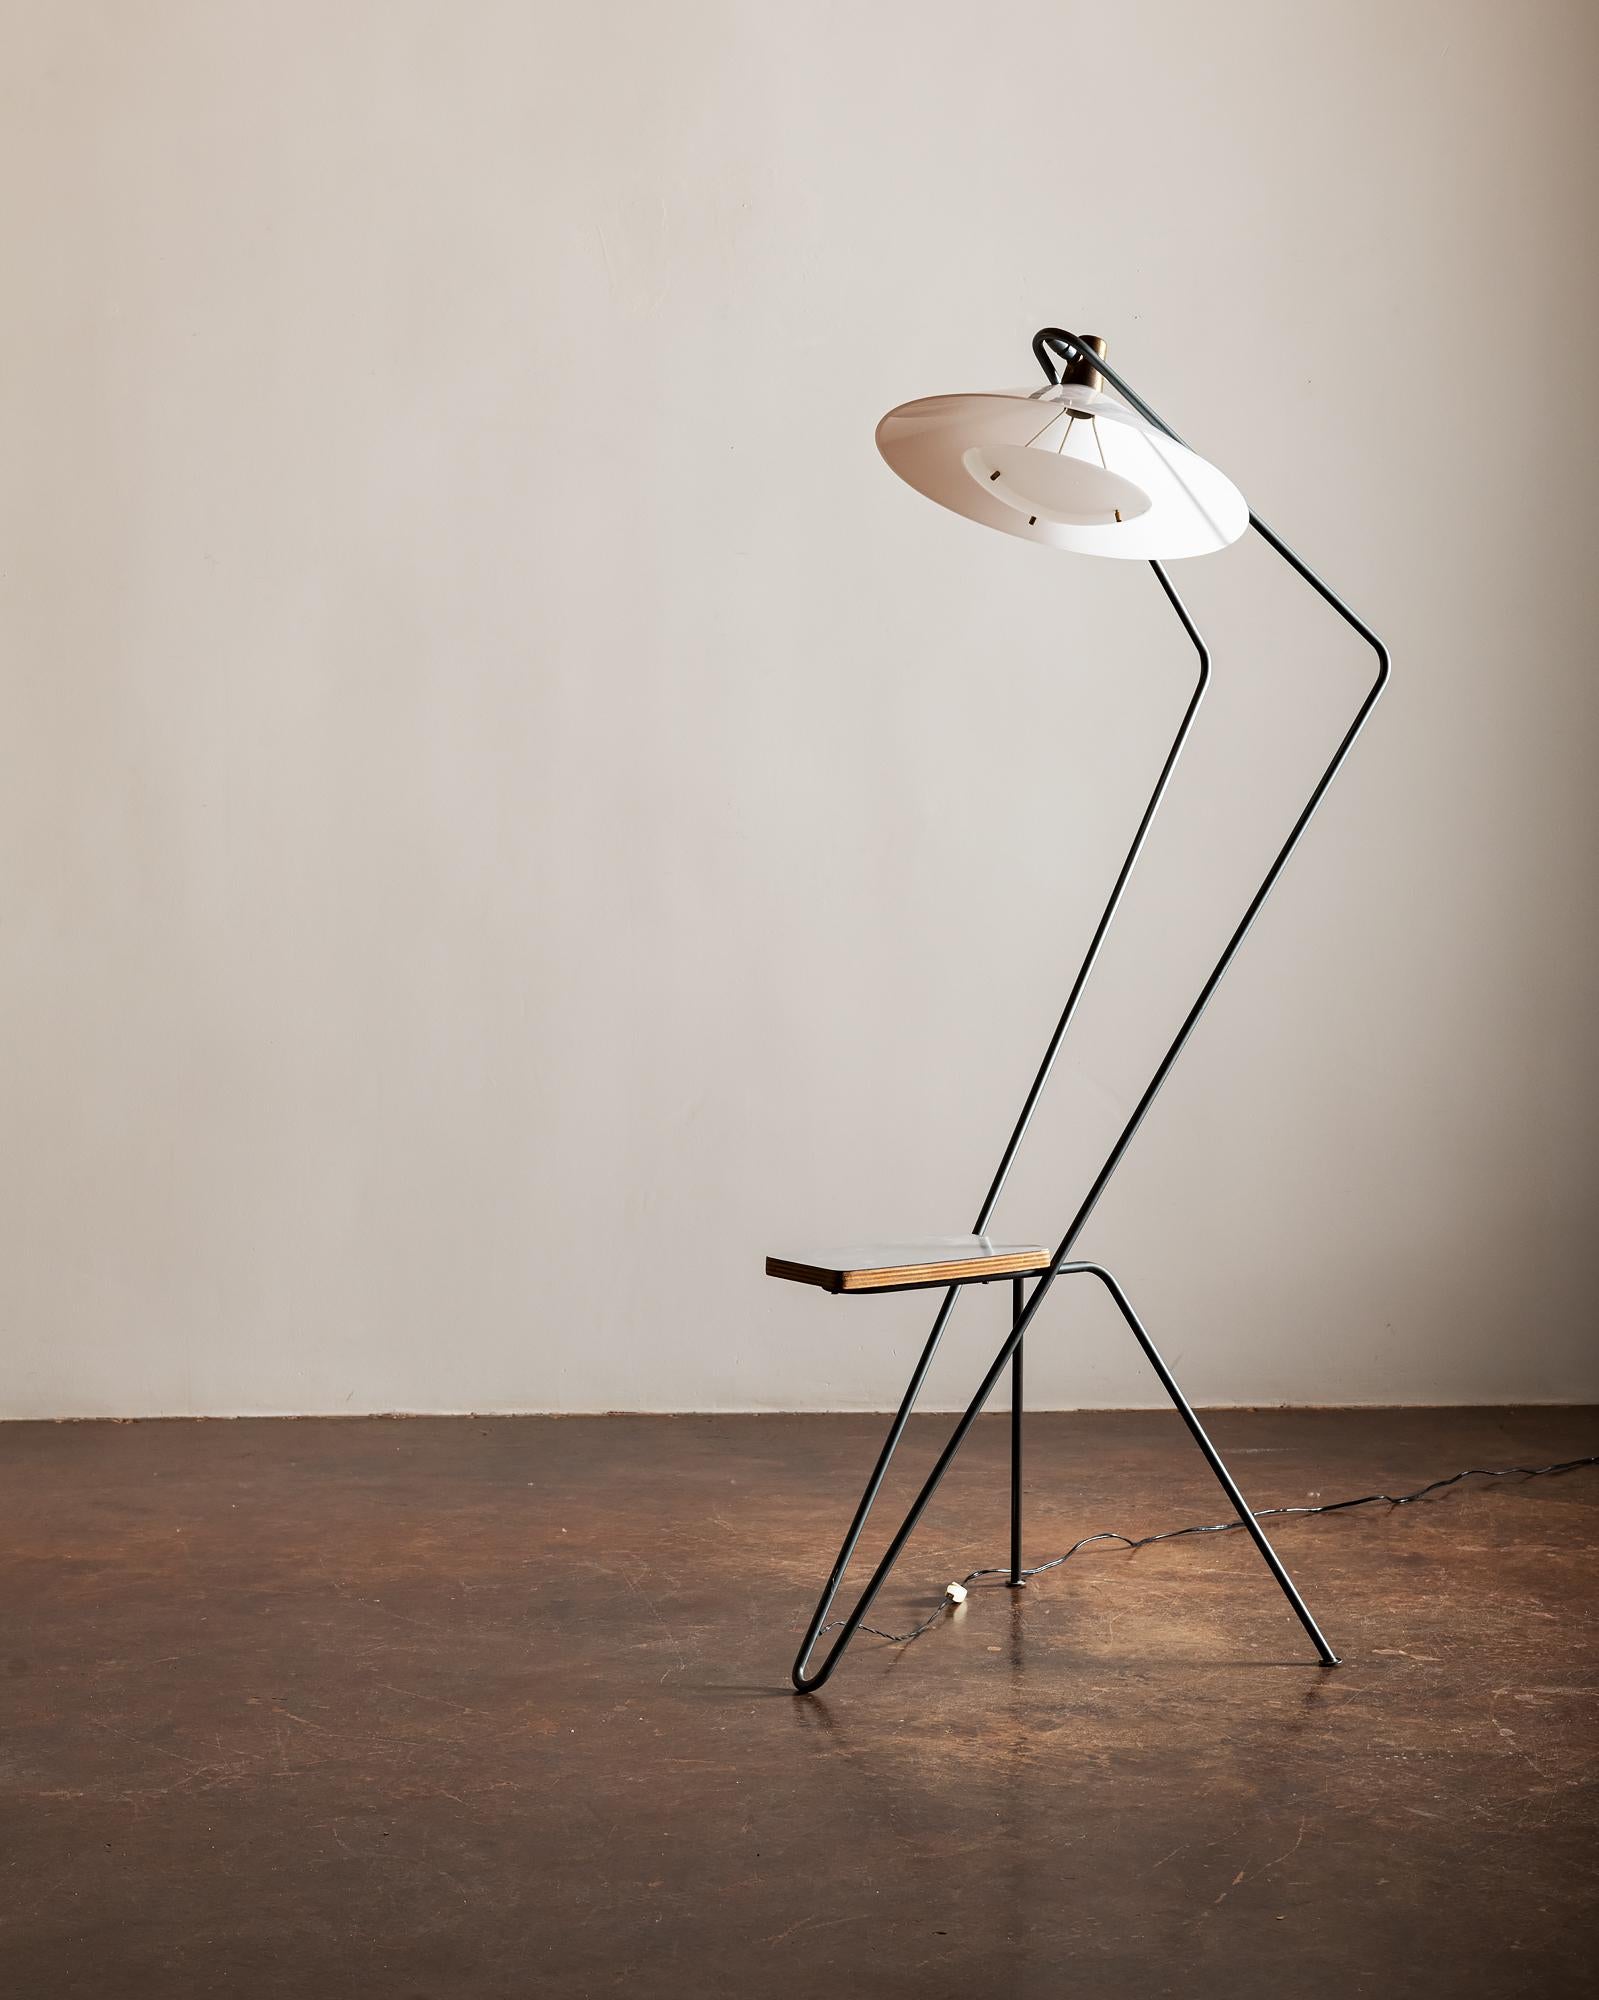 Sculptural steel floor lamp with laminated side table and Perspex shade. Designed by Robert Mathieu, France, 1955.